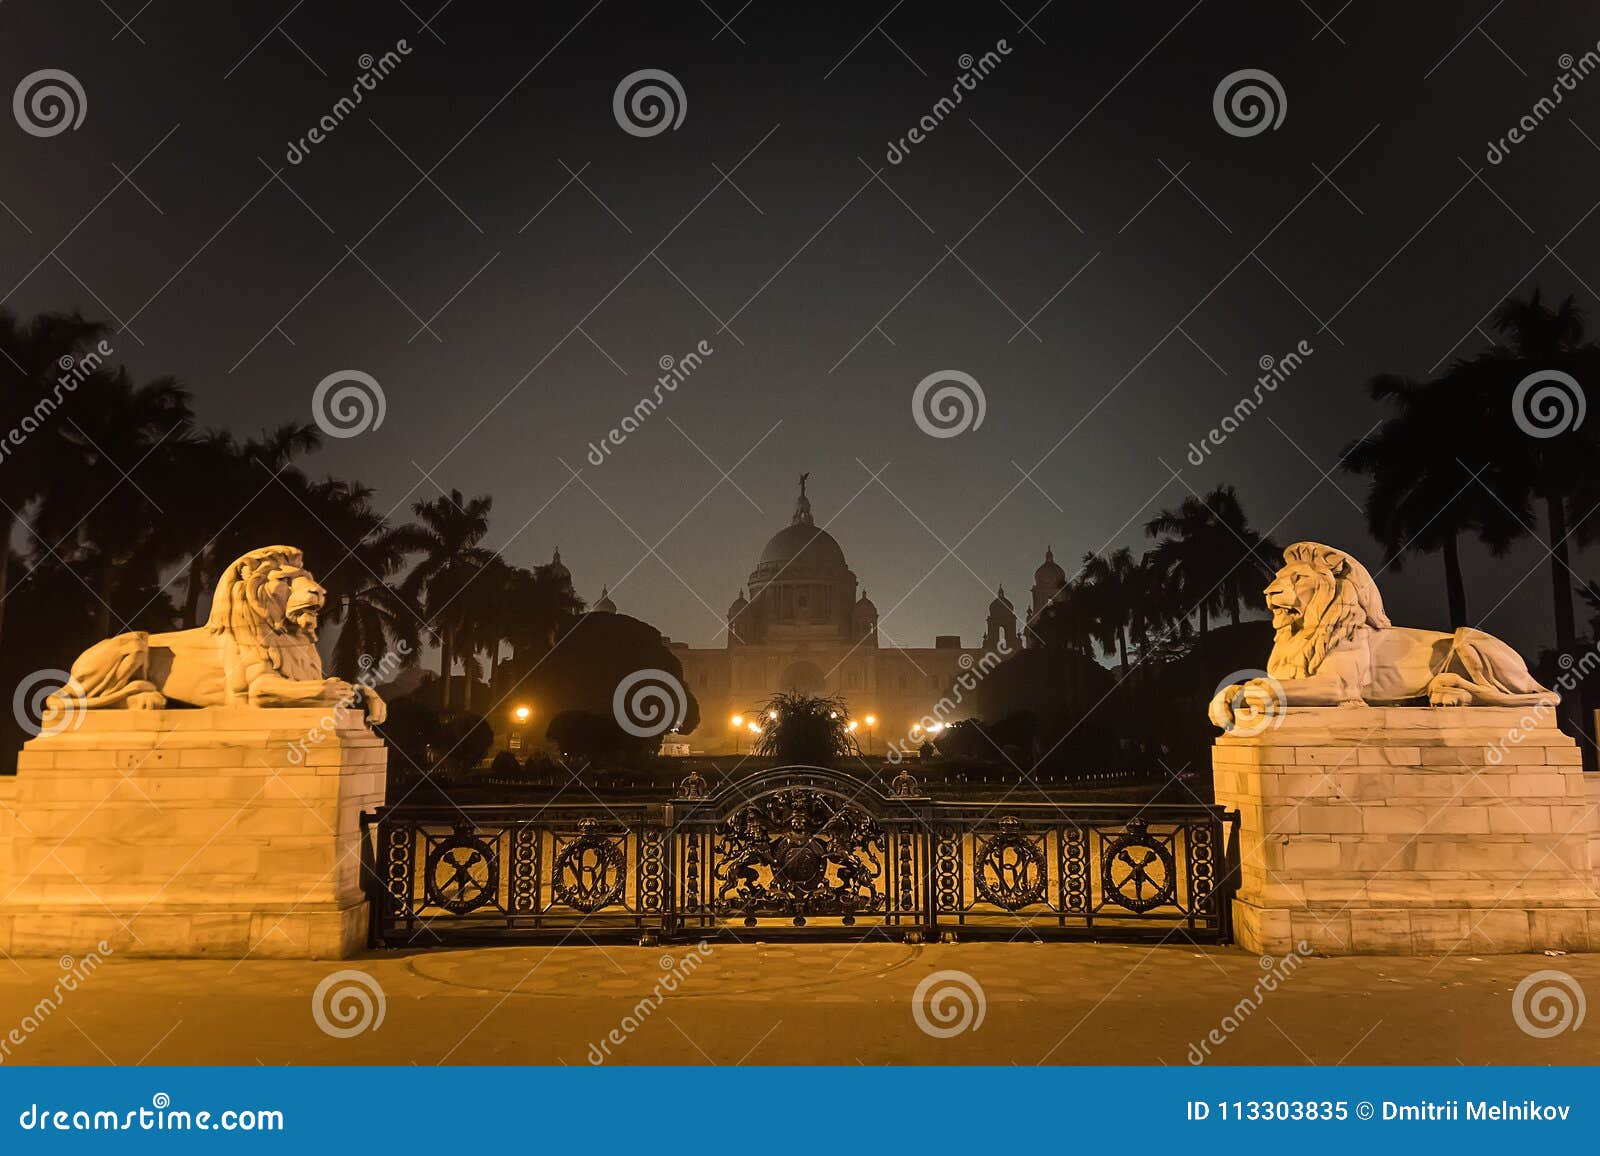 entrance gate with white marble lions of victoria memorial